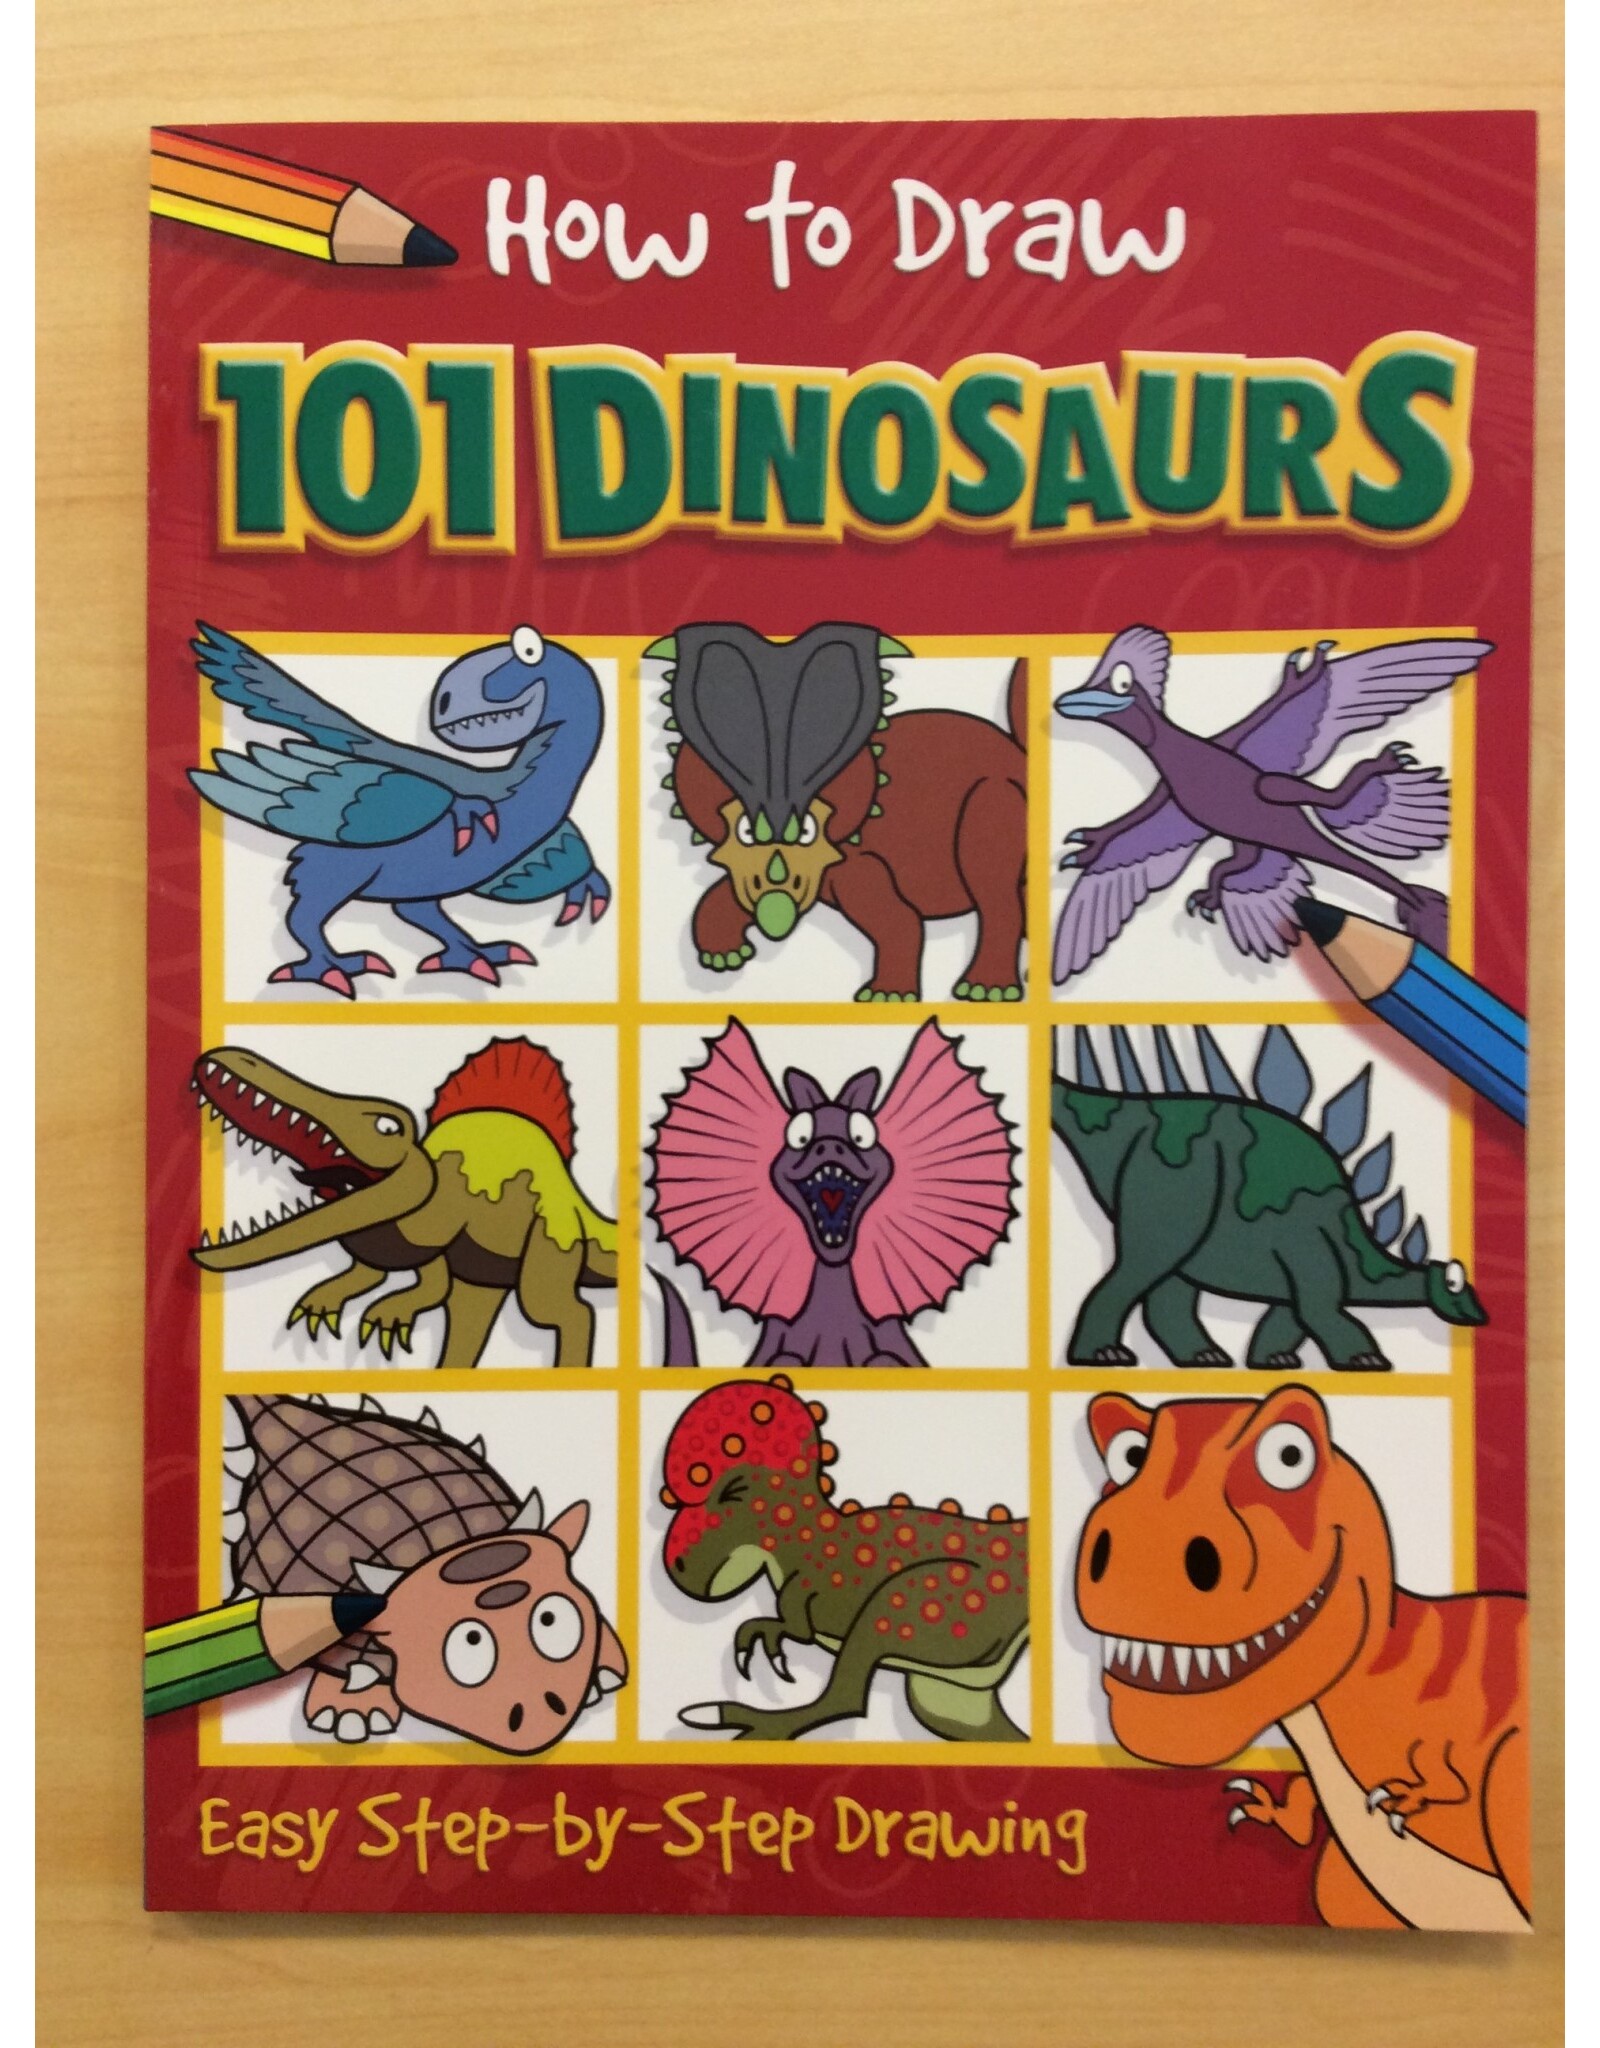 Imagine That How to Draw 101 Dinosaurs